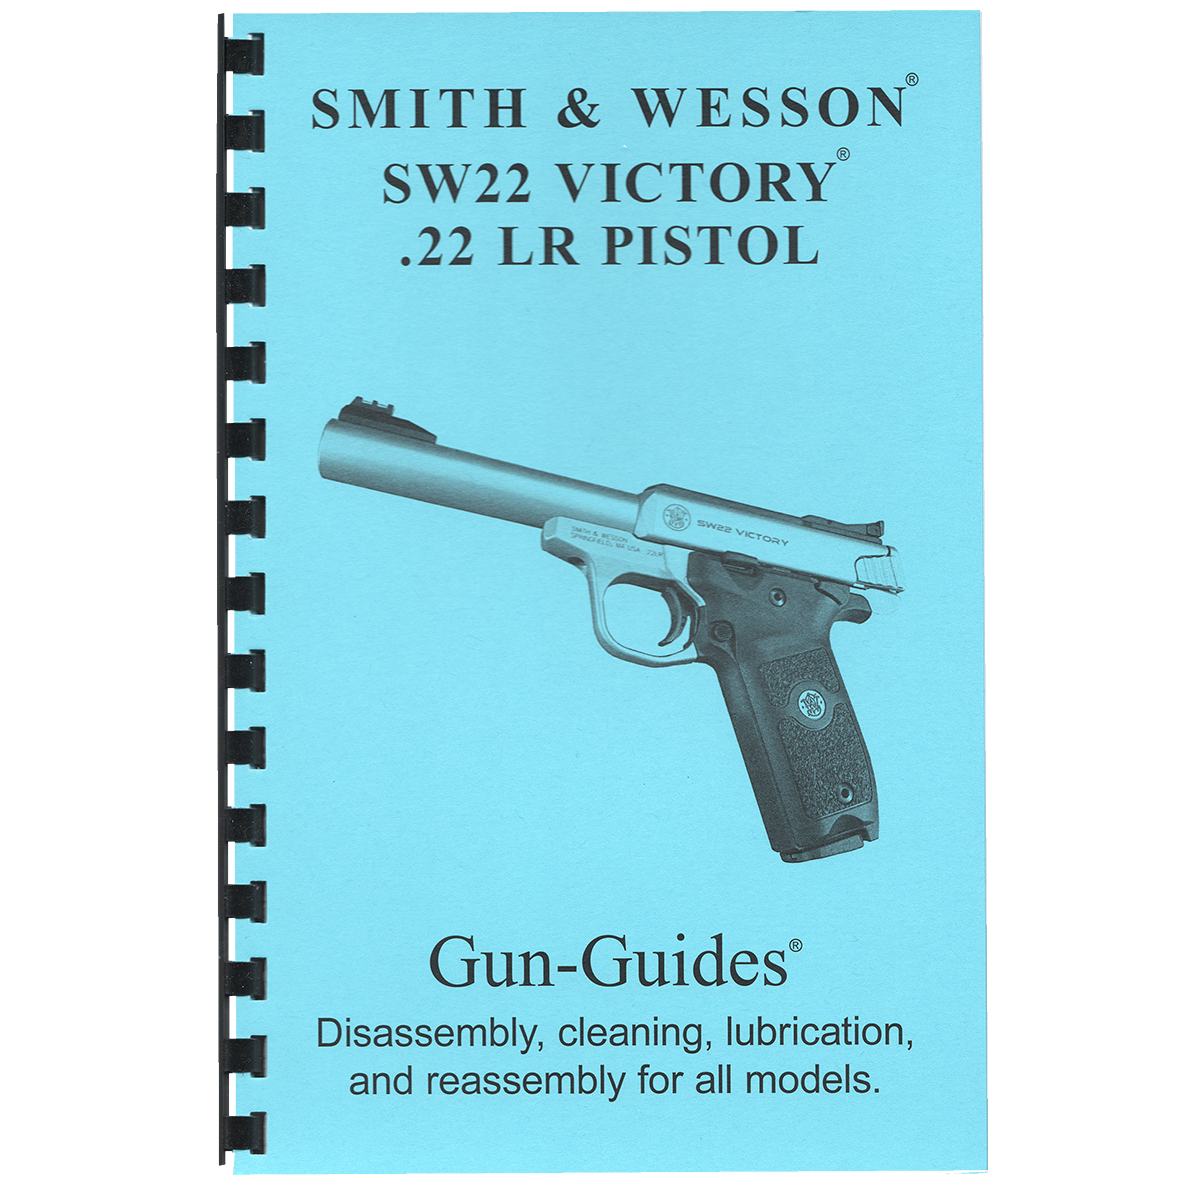 Smith&Wesson SW22 Victory® Pistol - Gun-Guides® Disassembly, cleaning, lubrication and reassembly for all models.